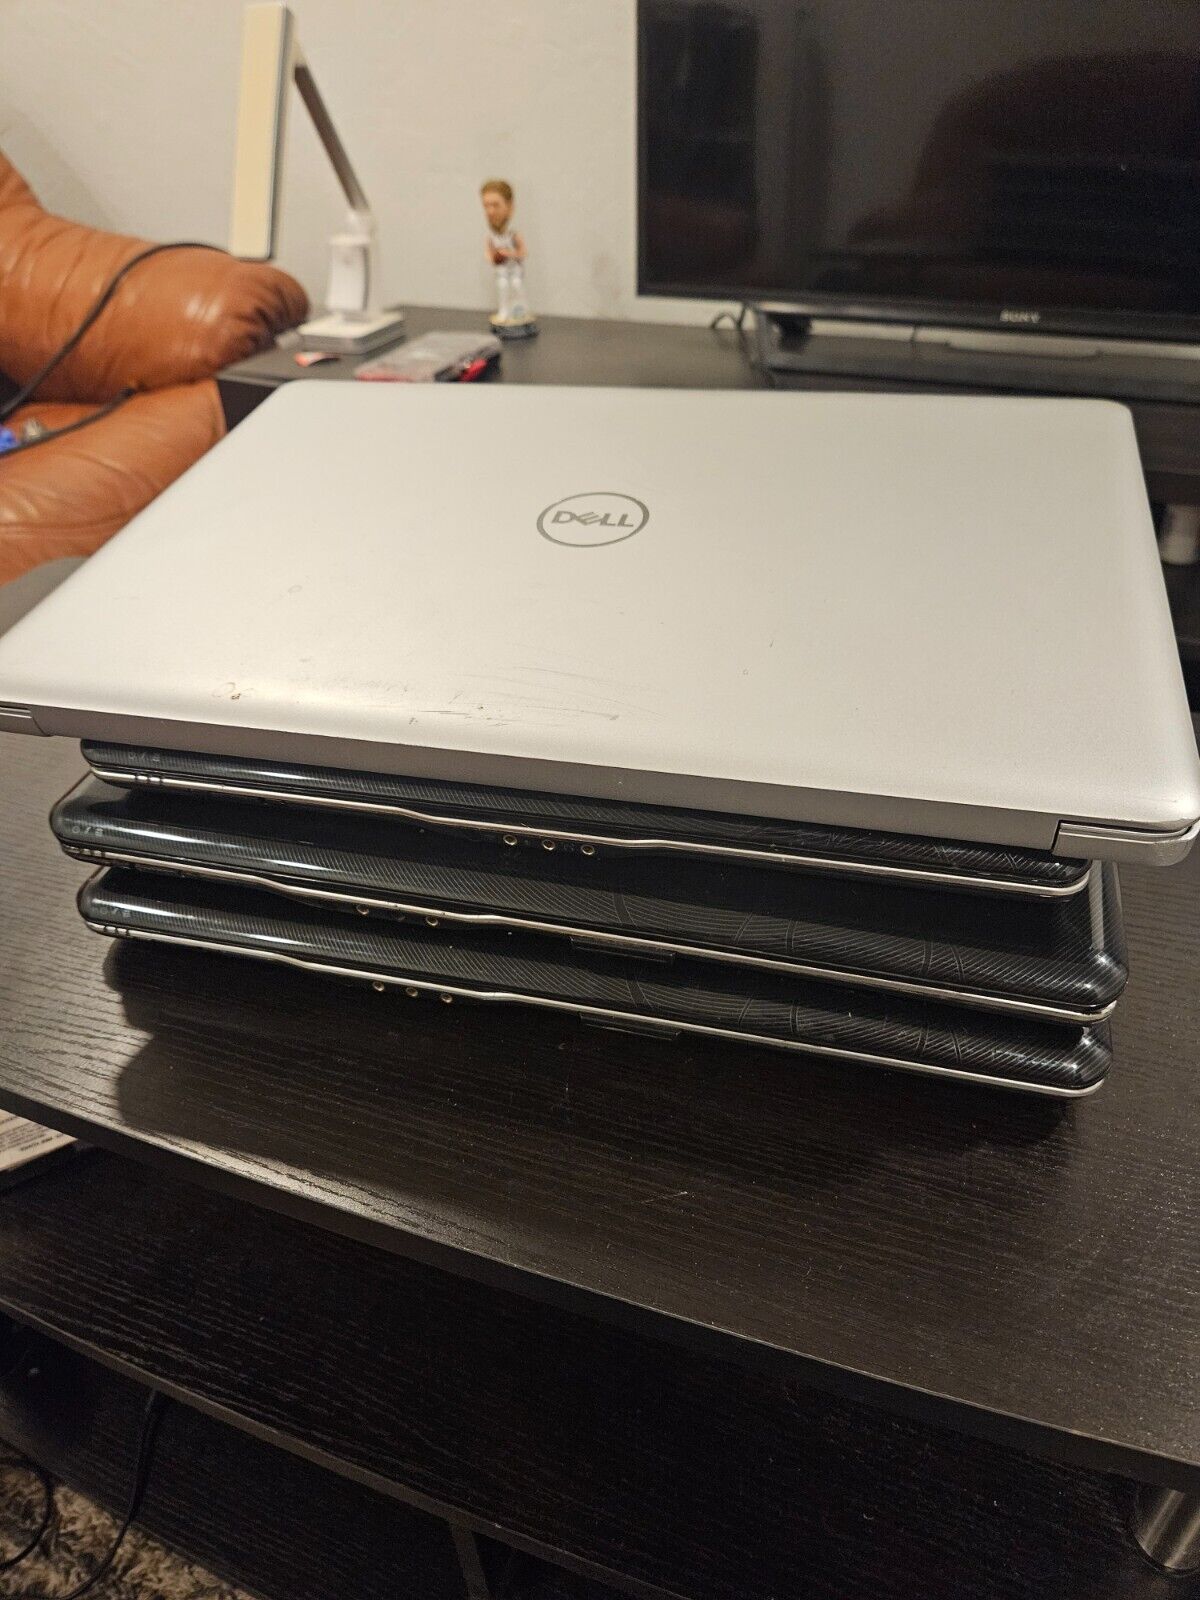 4 notebooks. HP working state, DELL unknown without hard drives and RAM one lot